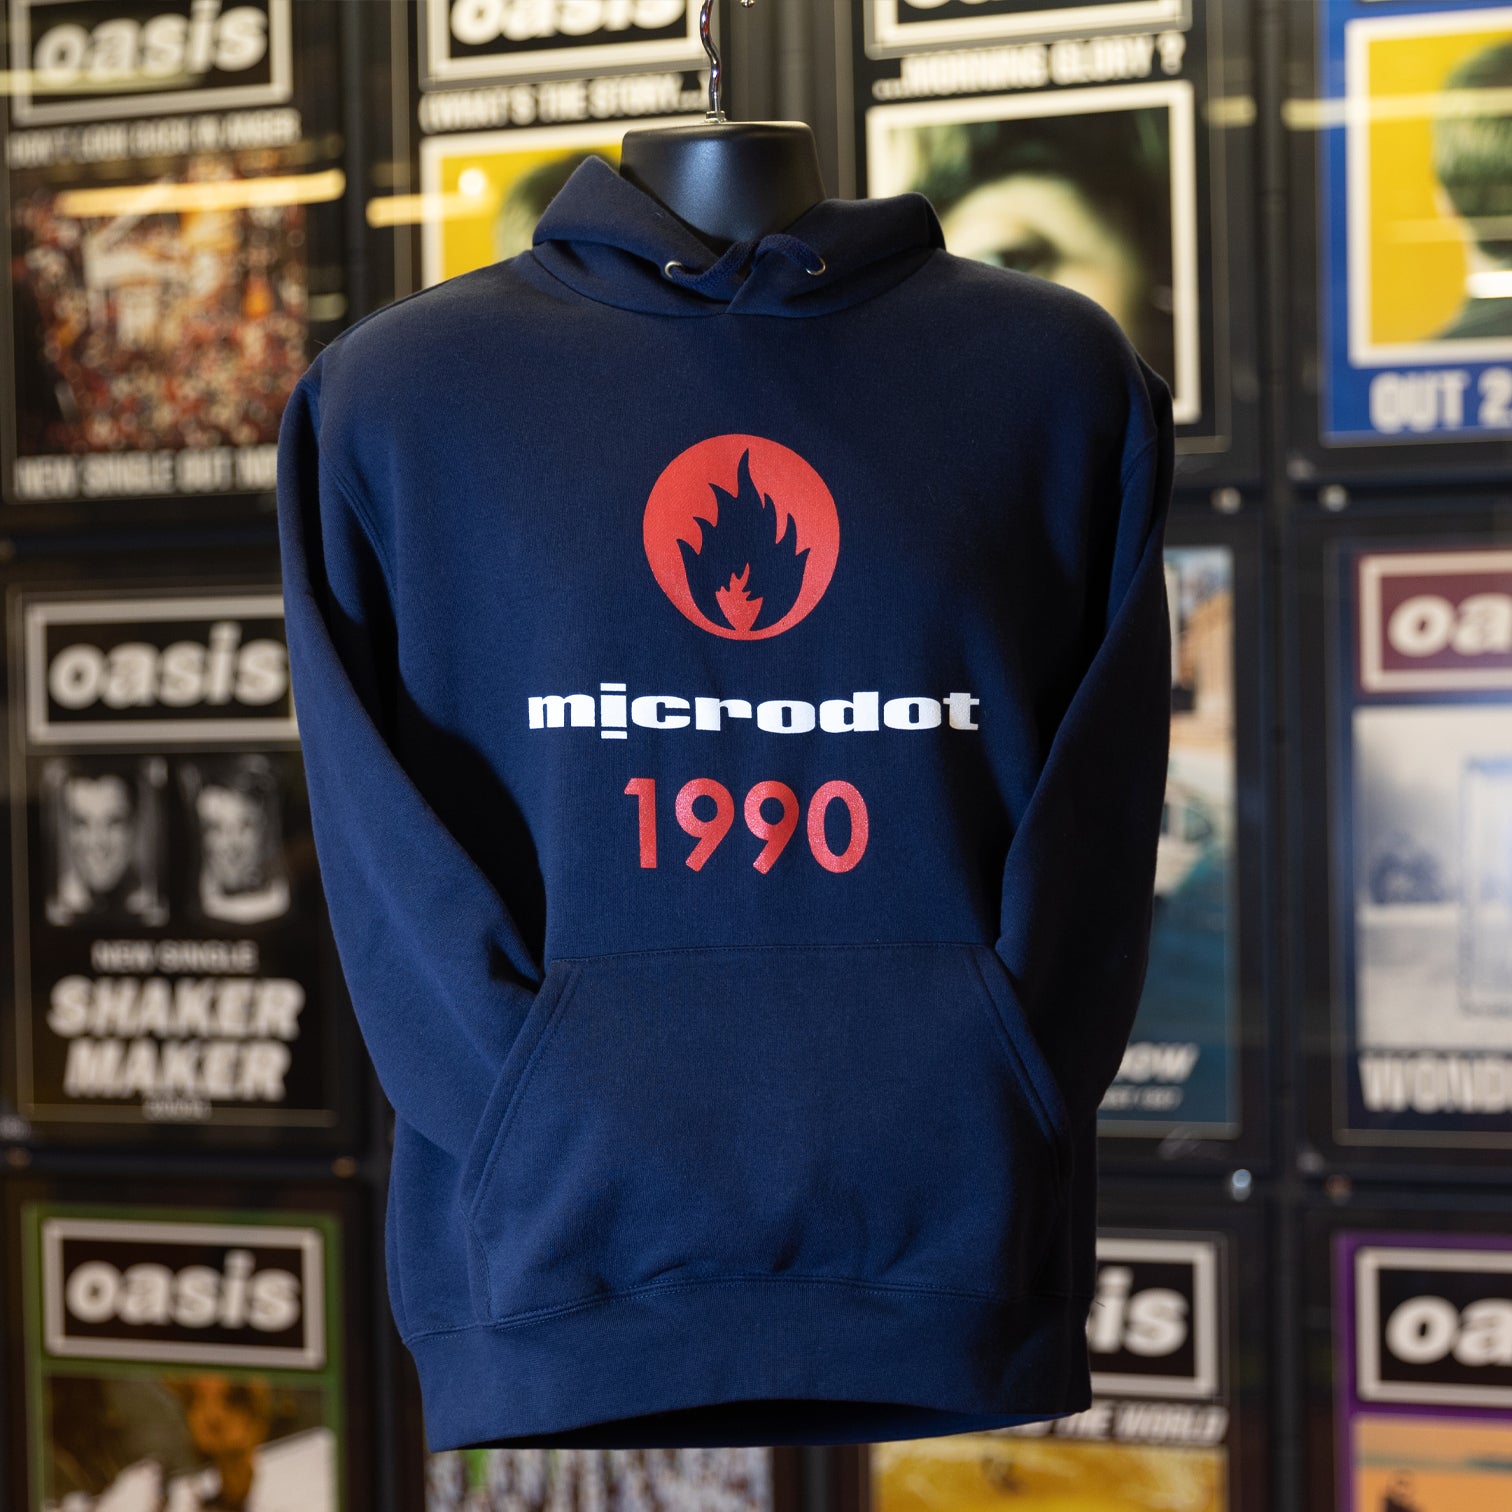 Microdot 'Flame 1990' Hoody - New Item